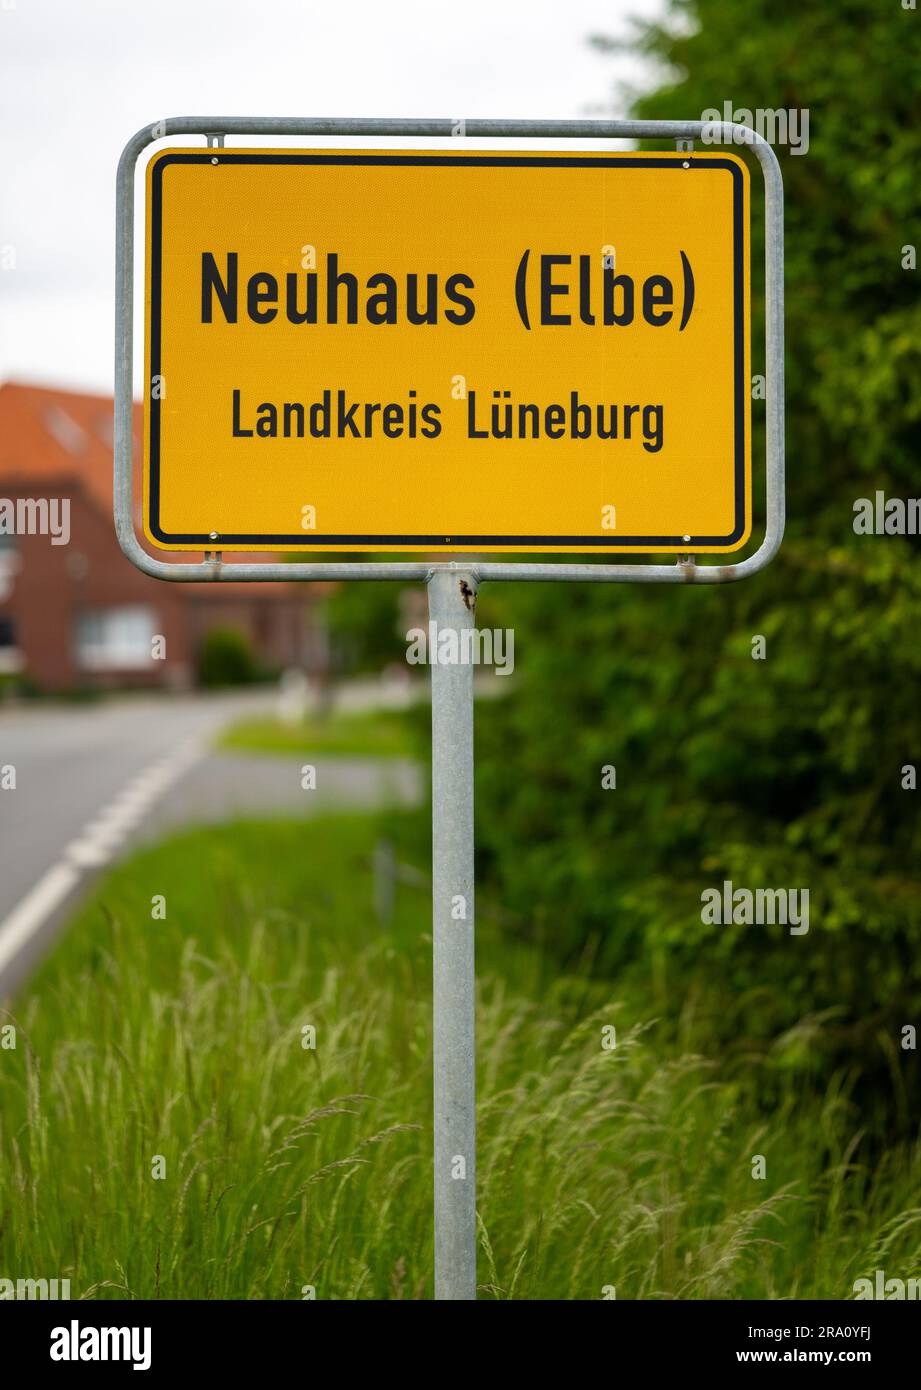 PRODUCTION - 24 May 2023, Lower Saxony, Amt Neuhaus: The town sign of Neuhaus (Elbe). The end of June marks the 30th anniversary of the reincorporation of the municipality of Amt Neuhaus and parts of the town of Bleckede into the district of Lüneburg. Since 1993, Amt Neuhaus and parts of the town of Bleckede have once again belonged to the district of Lüneburg. During the German division, the towns on the right bank of the Elbe were part of the GDR. After the German reunification the unification took place. On June 30, 1993, the reincorporation of the municipality of Amt Neuhaus and the distri Stock Photo